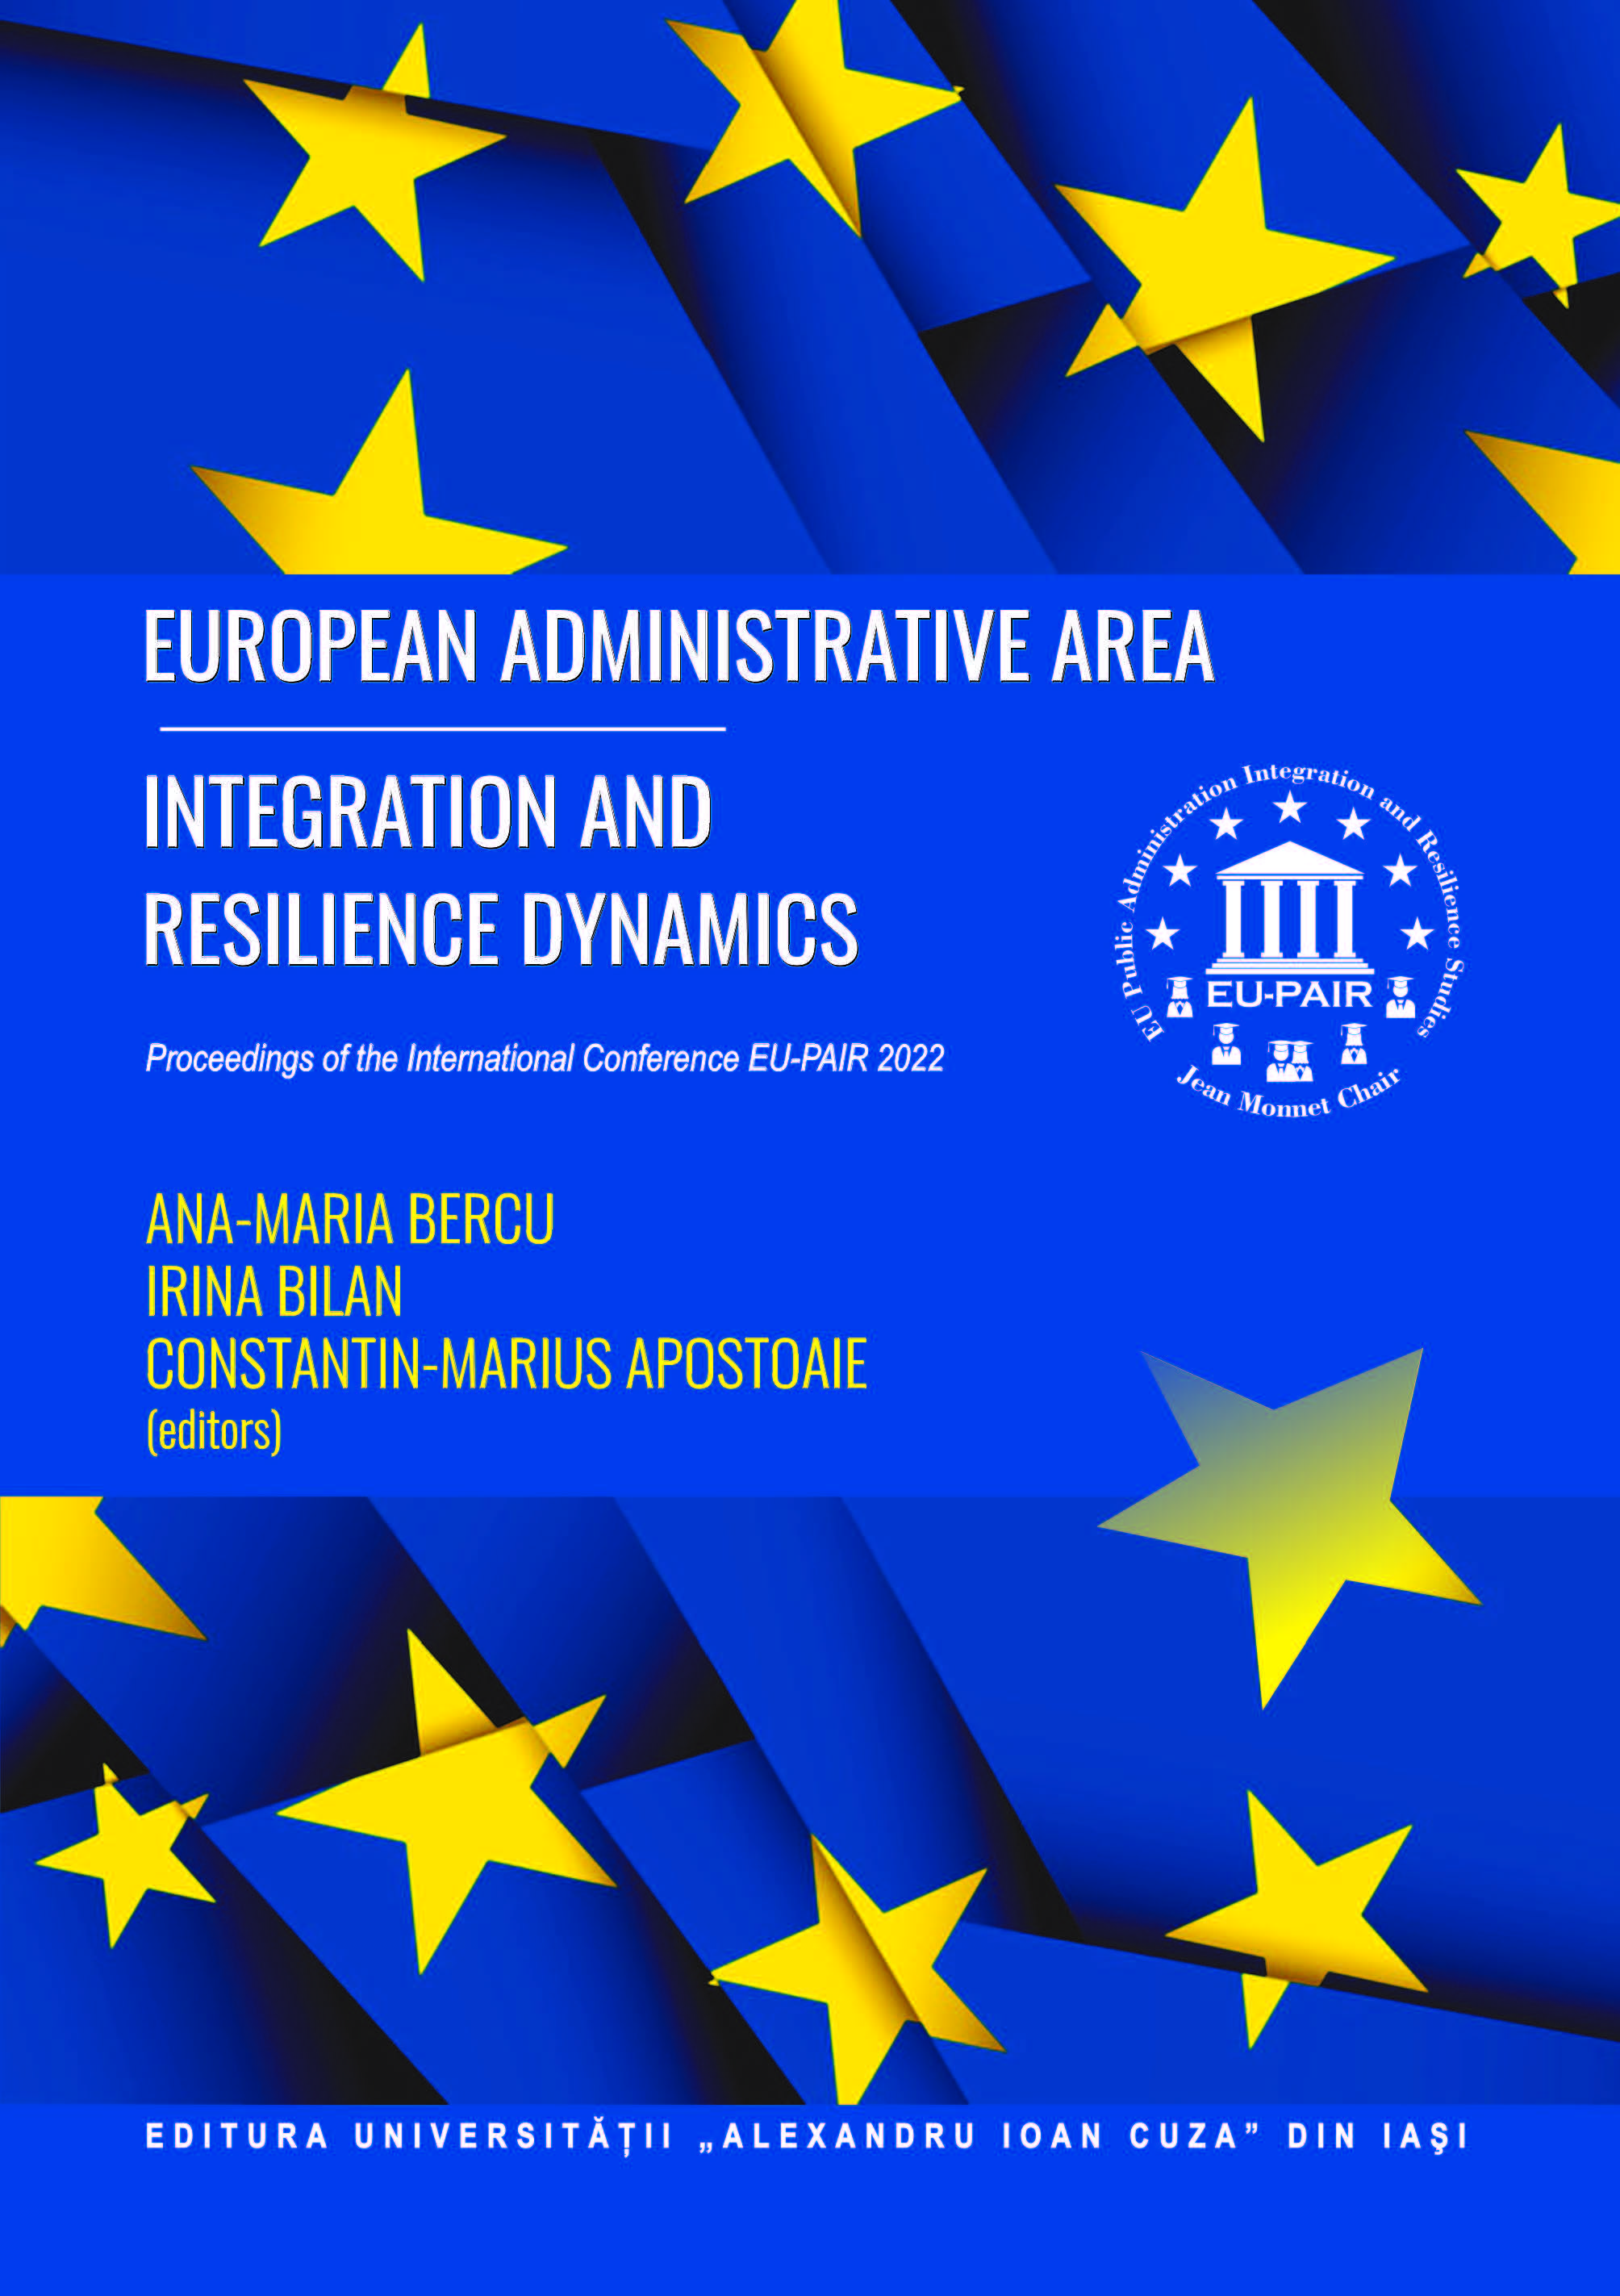 European Administrative Area - Integration and Resilience Dynamics.Proceedings of the International Conference EU-PAIR 2022